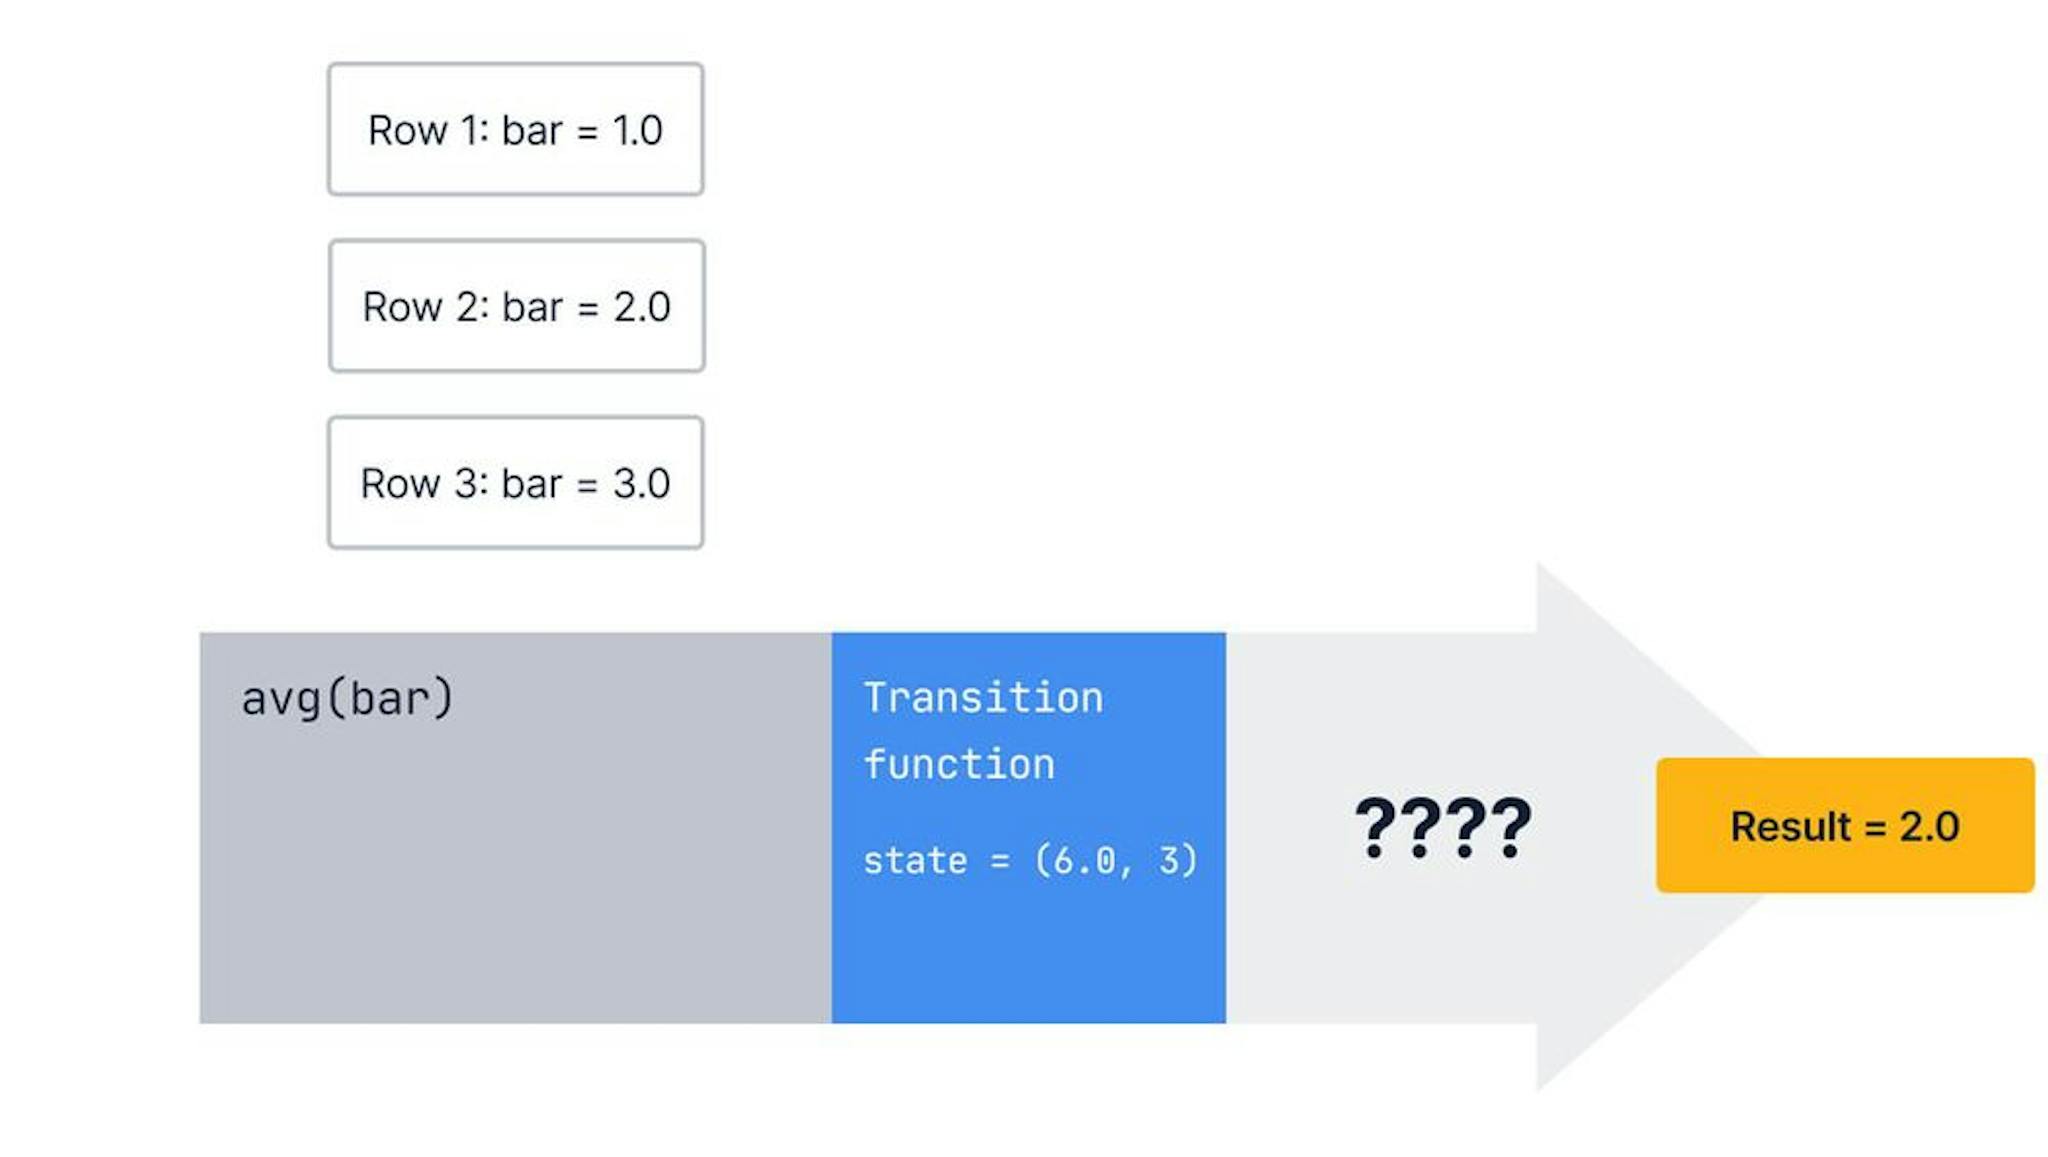 For some aggregates, we can output the state directly – but for others, we need to perform an operation on the state before calculating our final result. 